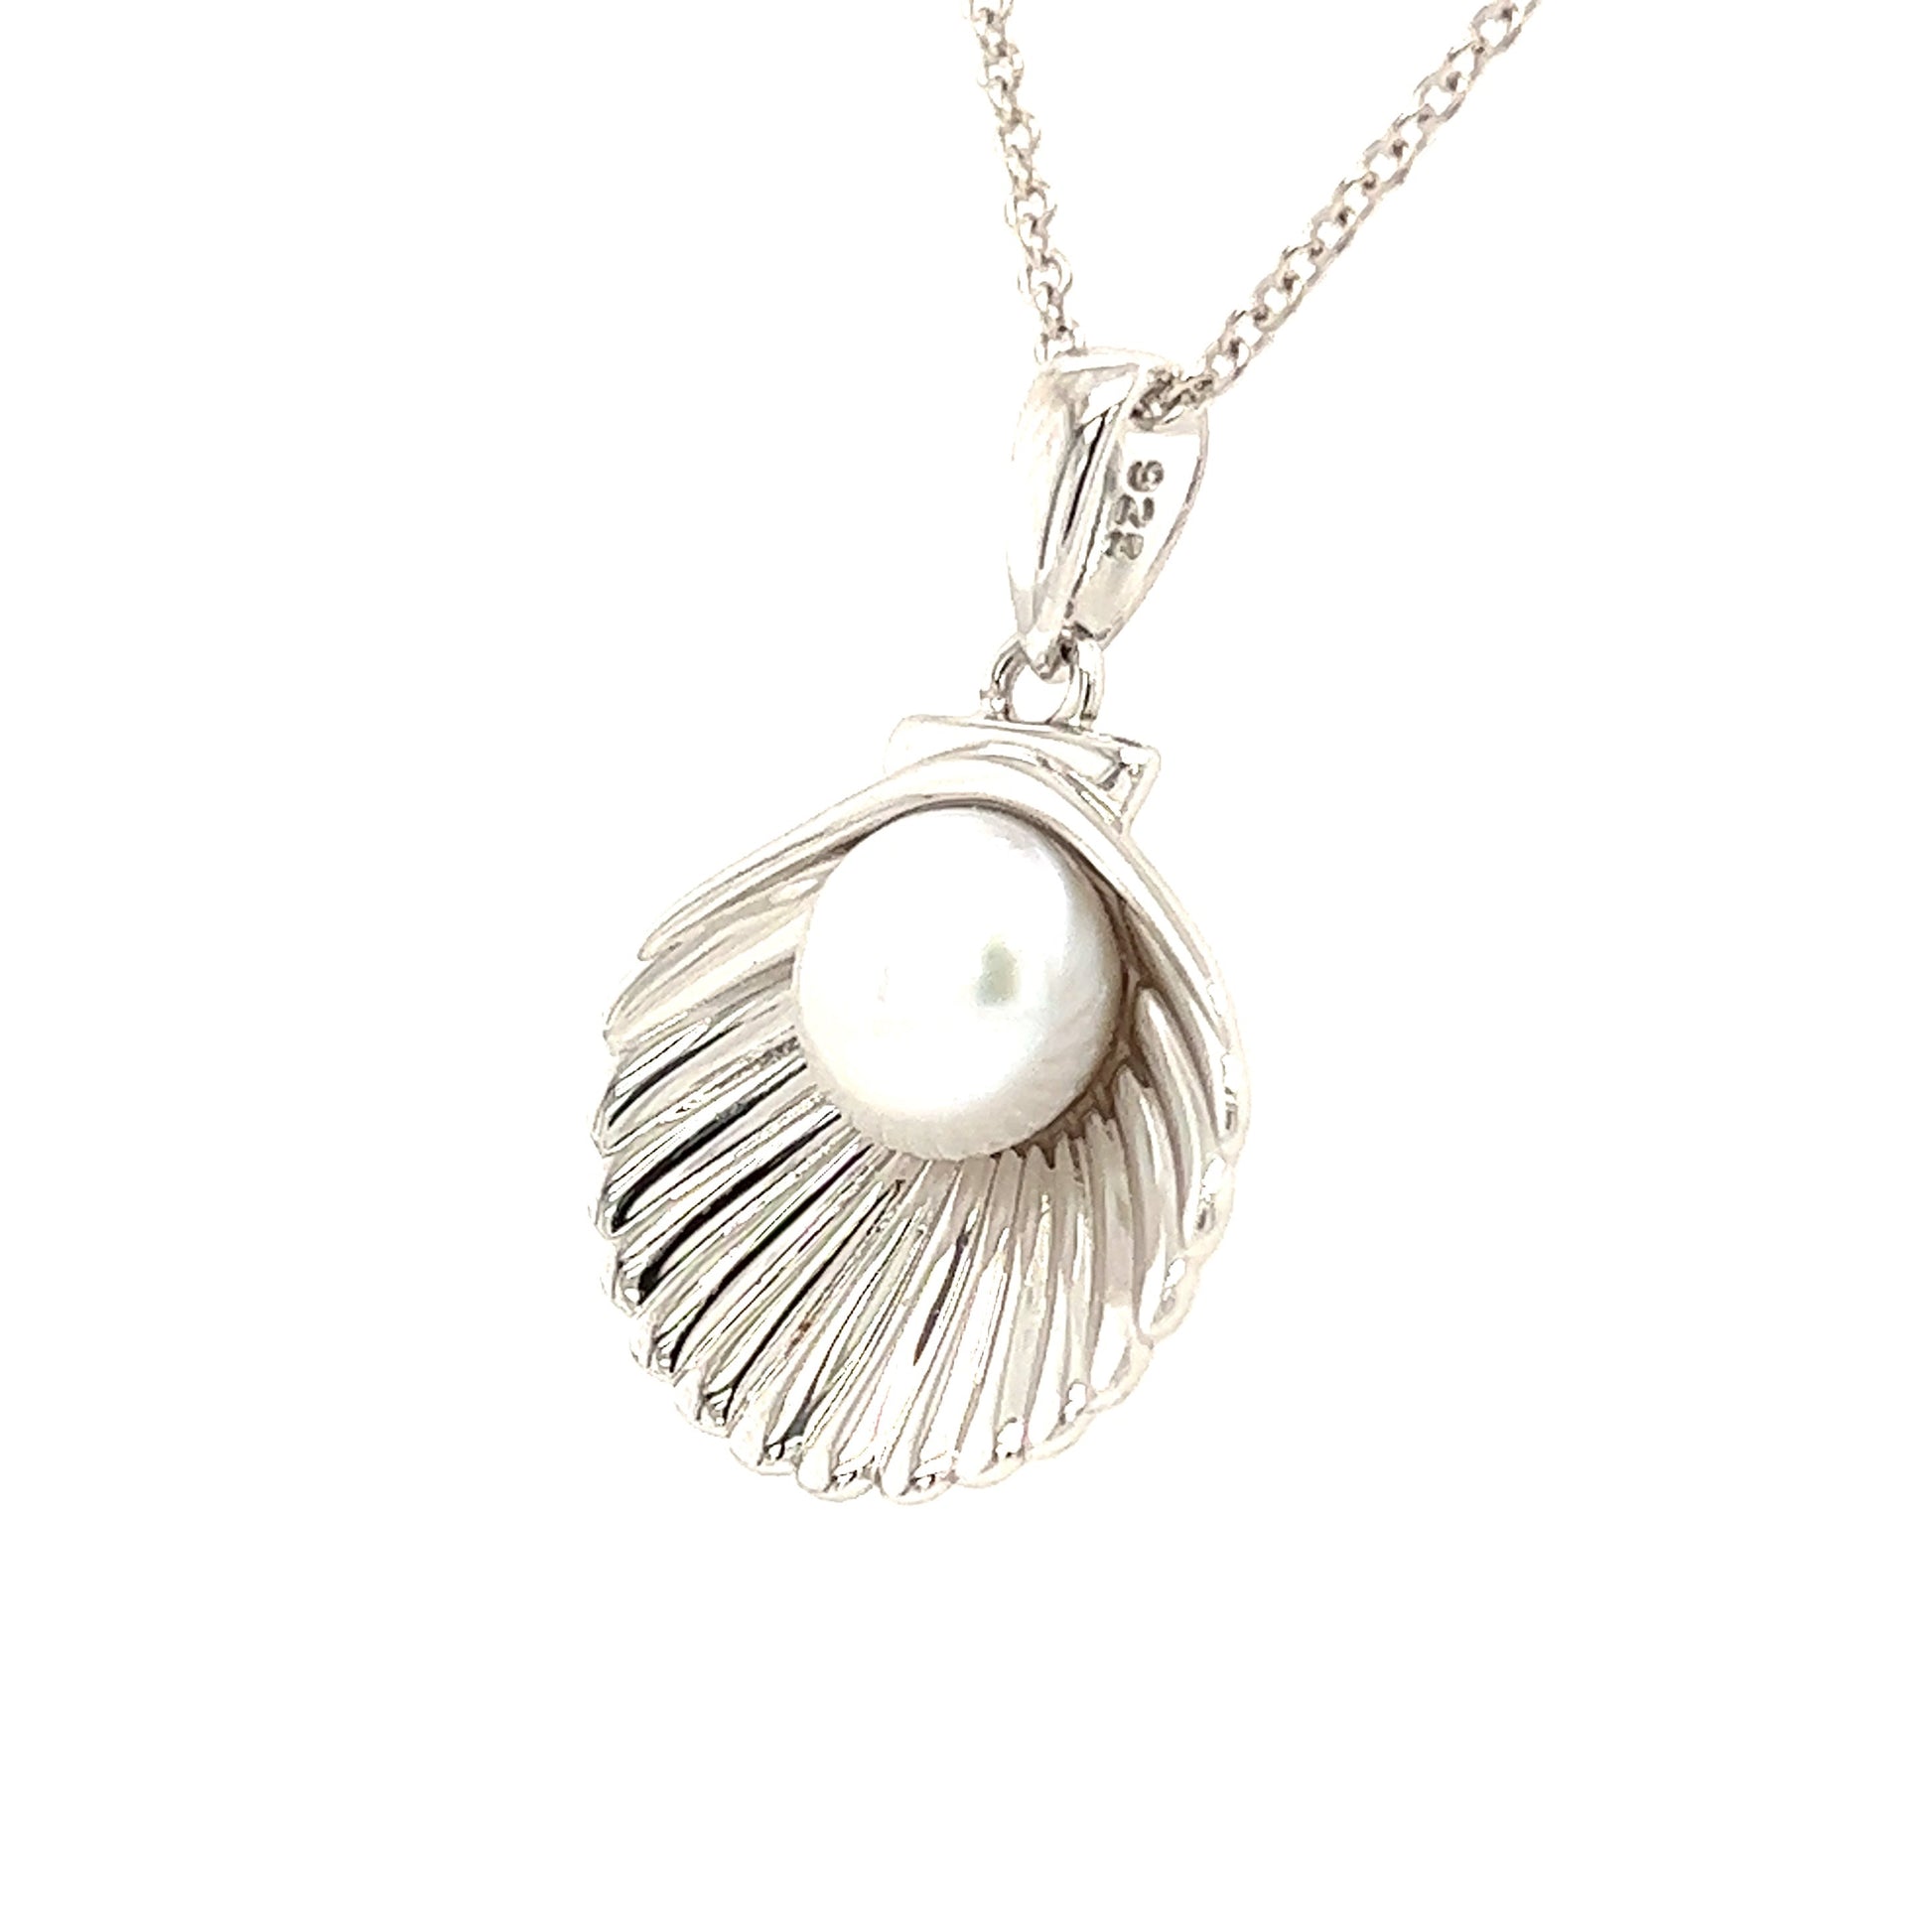 Shell Necklace with White Pearl in Sterling Silver Pendant Left Side